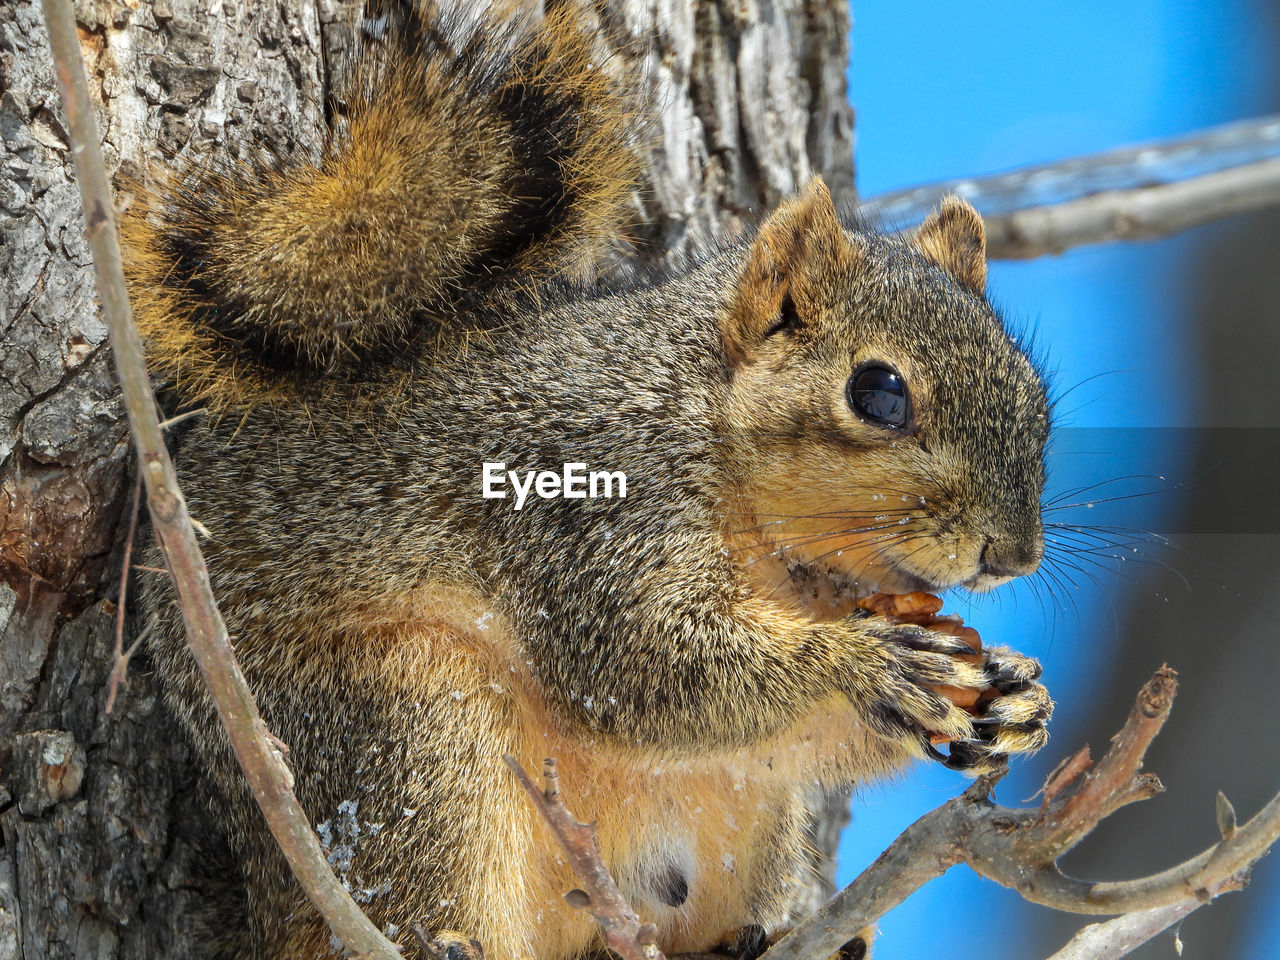 CLOSE-UP OF SQUIRREL EATING TREE